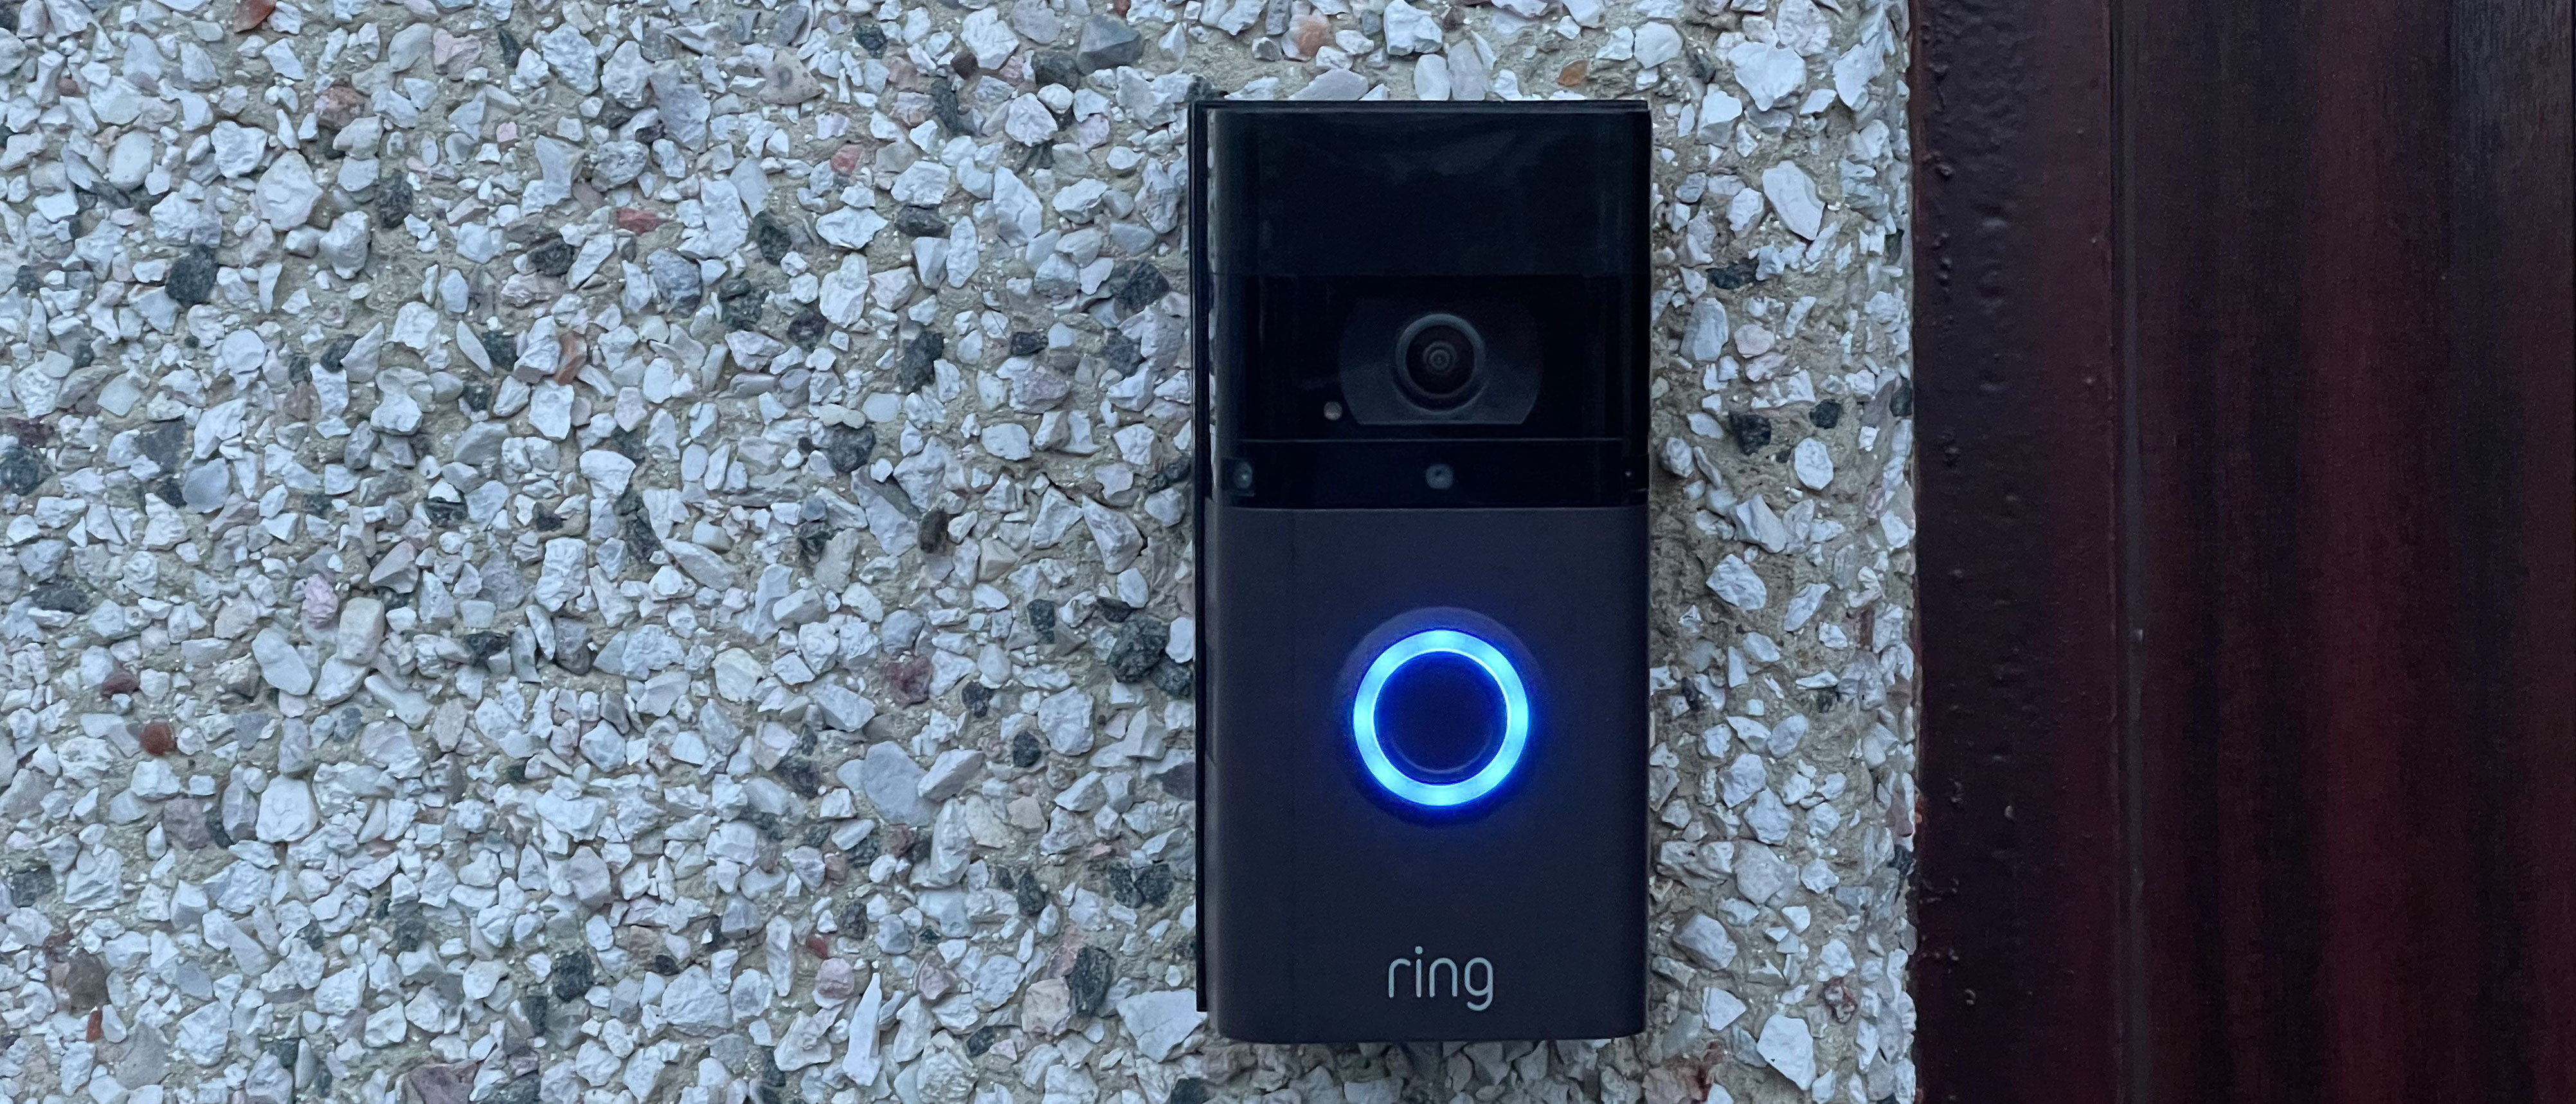 How To Change The Ring Doorbell Sound